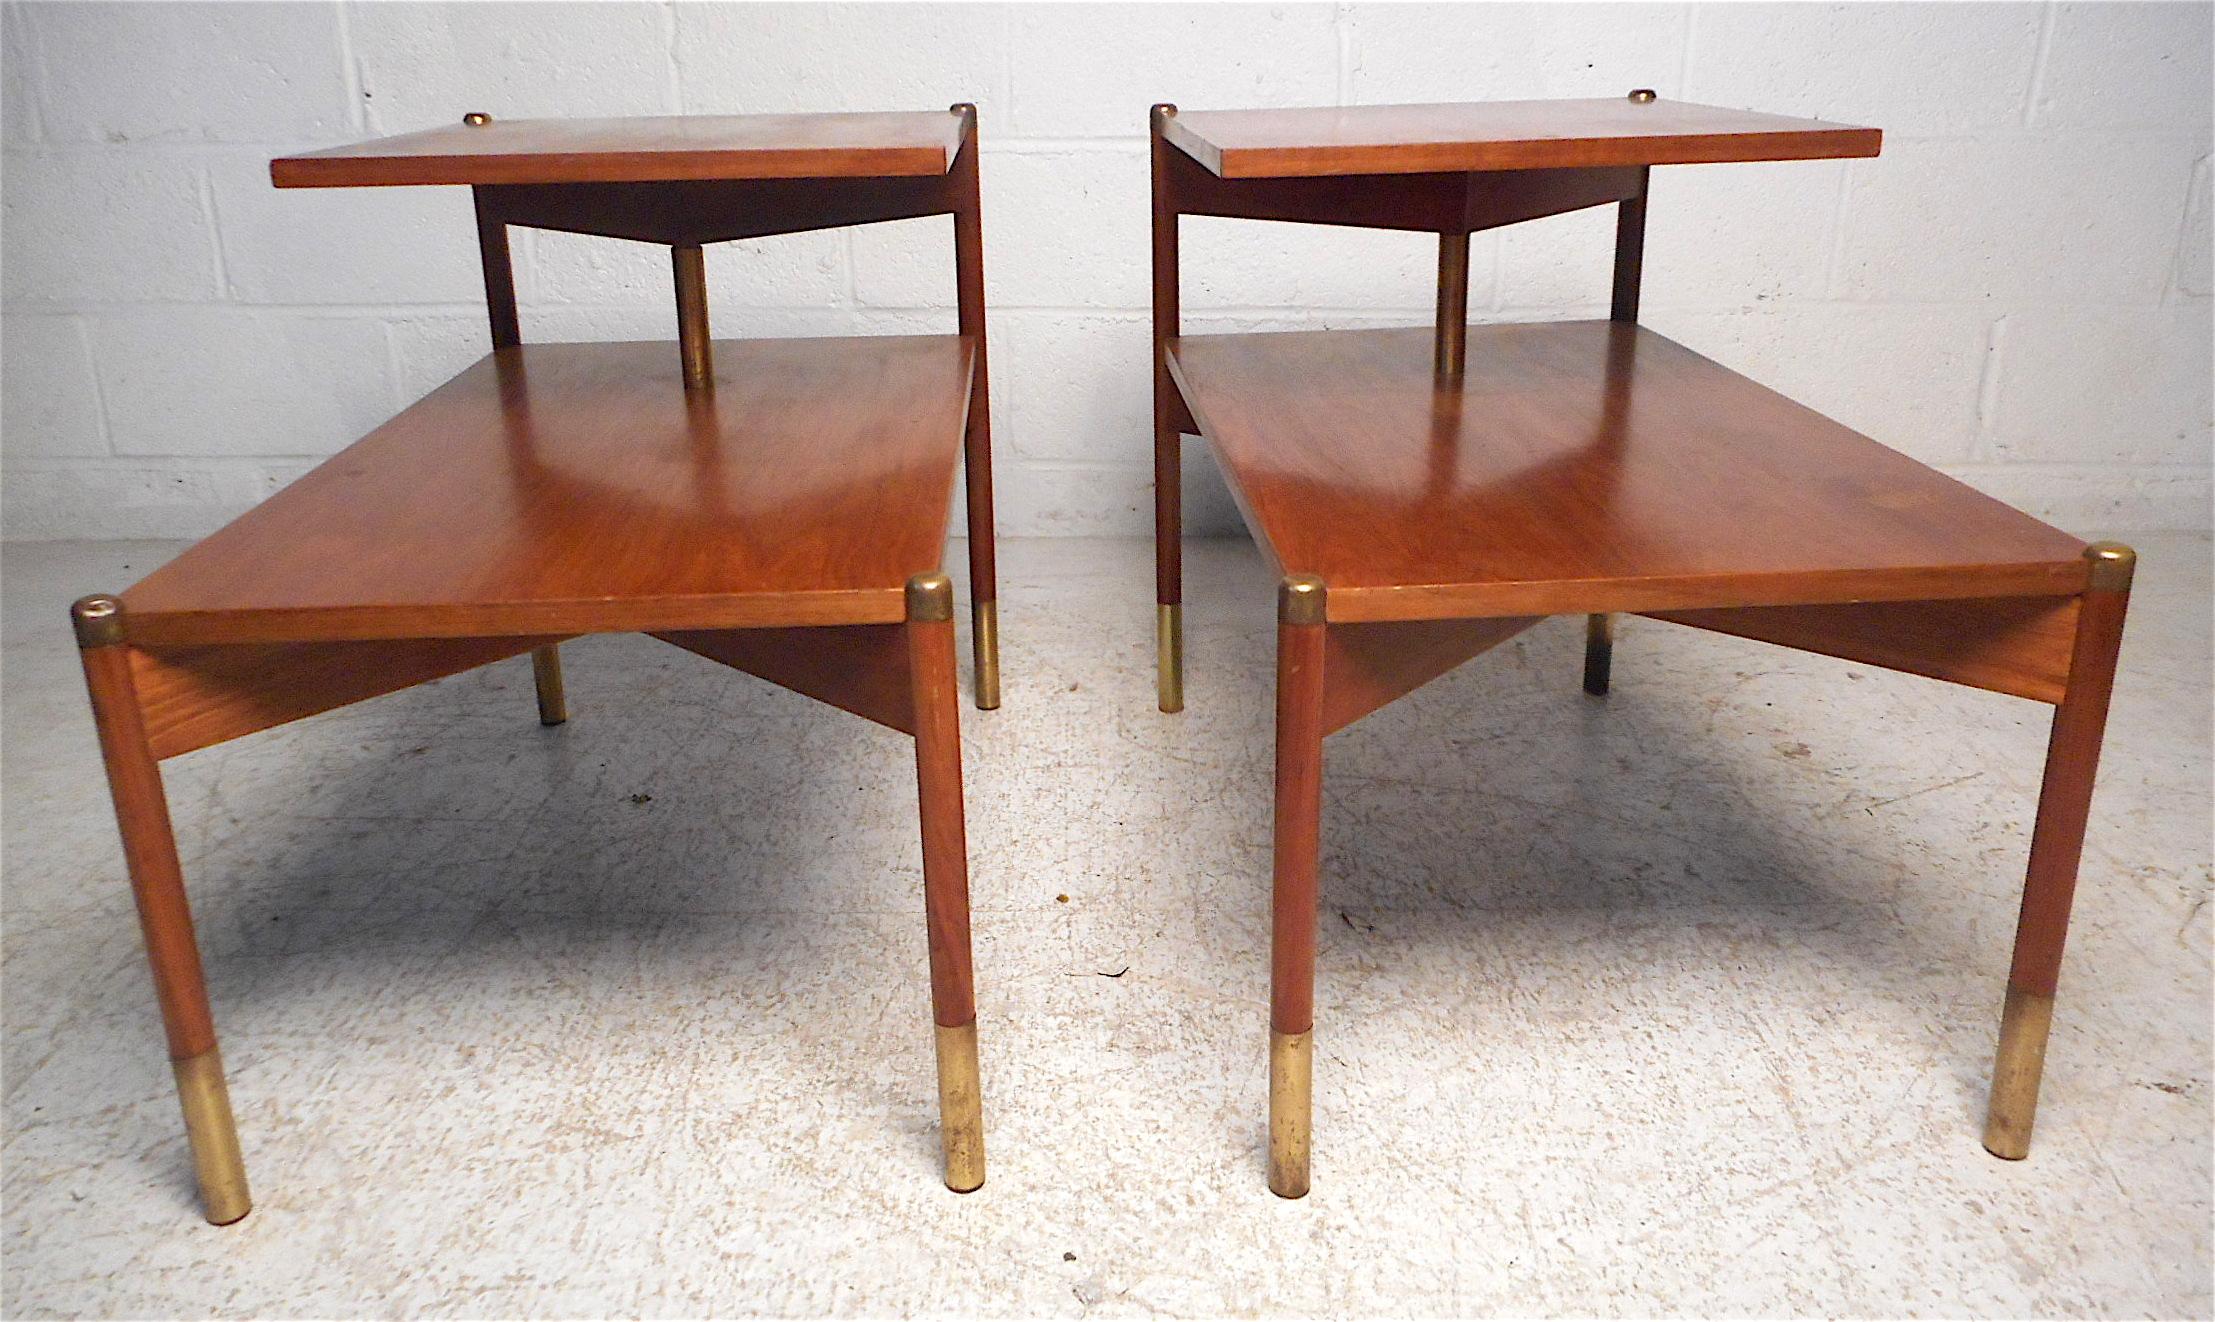 Great pair of walnut midcentury lamp/end tables with brass plated sabots and end caps. Please confirm item location - NY or NJ.